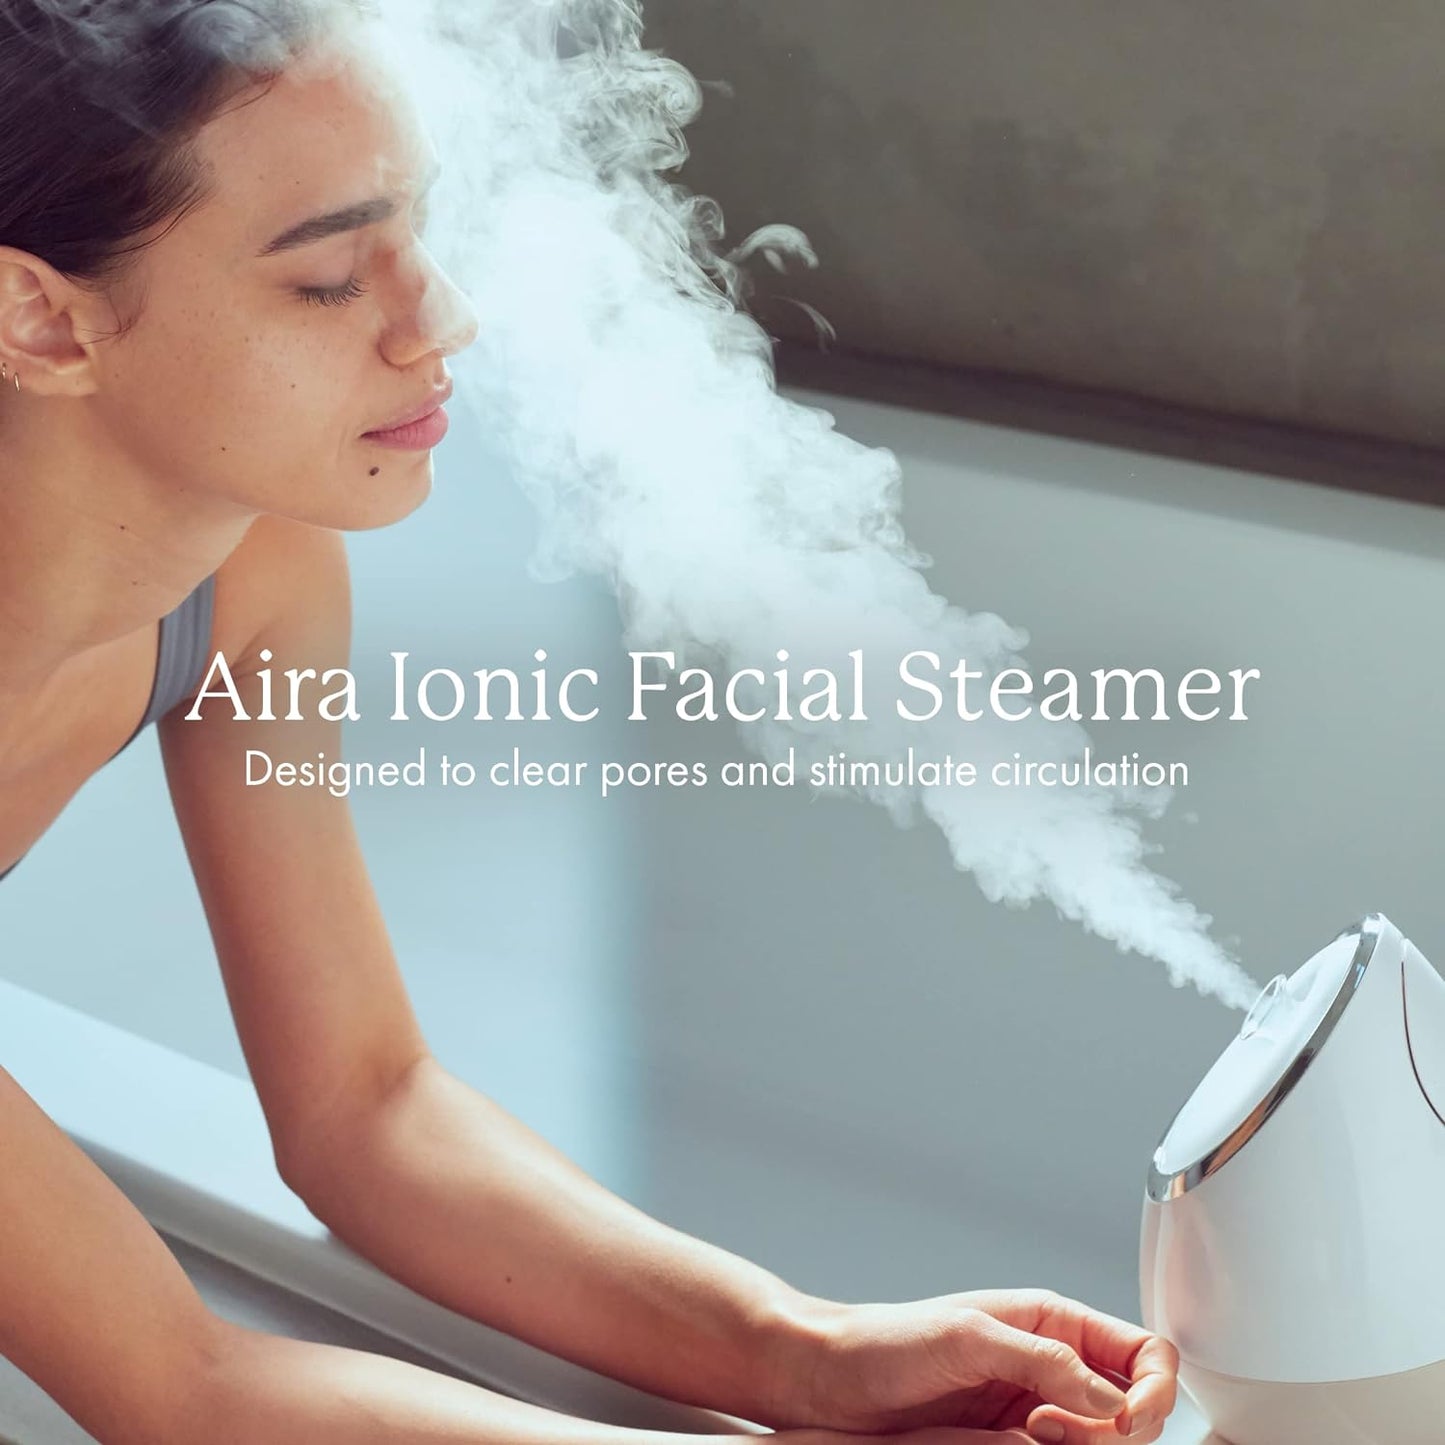 Vanity Planet Aira Ionic Facial Steamer (Beige) - Pore Cleaner That Detoxifies, Cleanses and Moisturizes - Adjustable Nozzle, Water Tank with 3 Essential Oil Baskets